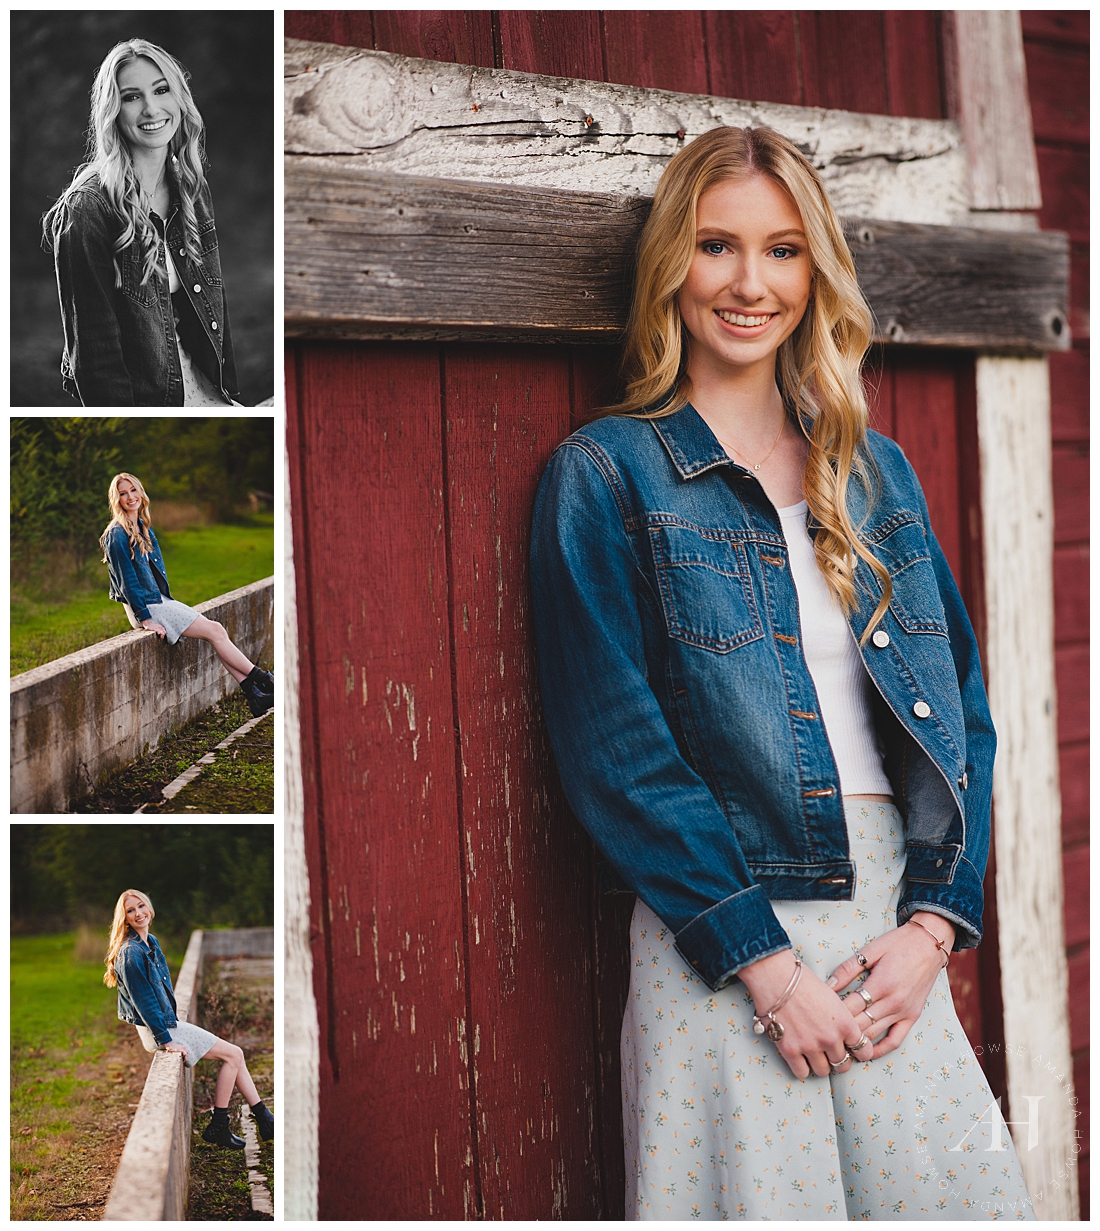 Cute Senior Portraits by a Barn | Fort Steilacoom Portraits, Lakewood Seniors, Pose Ideas for Senior Girls, Casual Outfit Inspiration | Photographed by Amanda Howse Photography, Tacoma's Best Senior Photographer